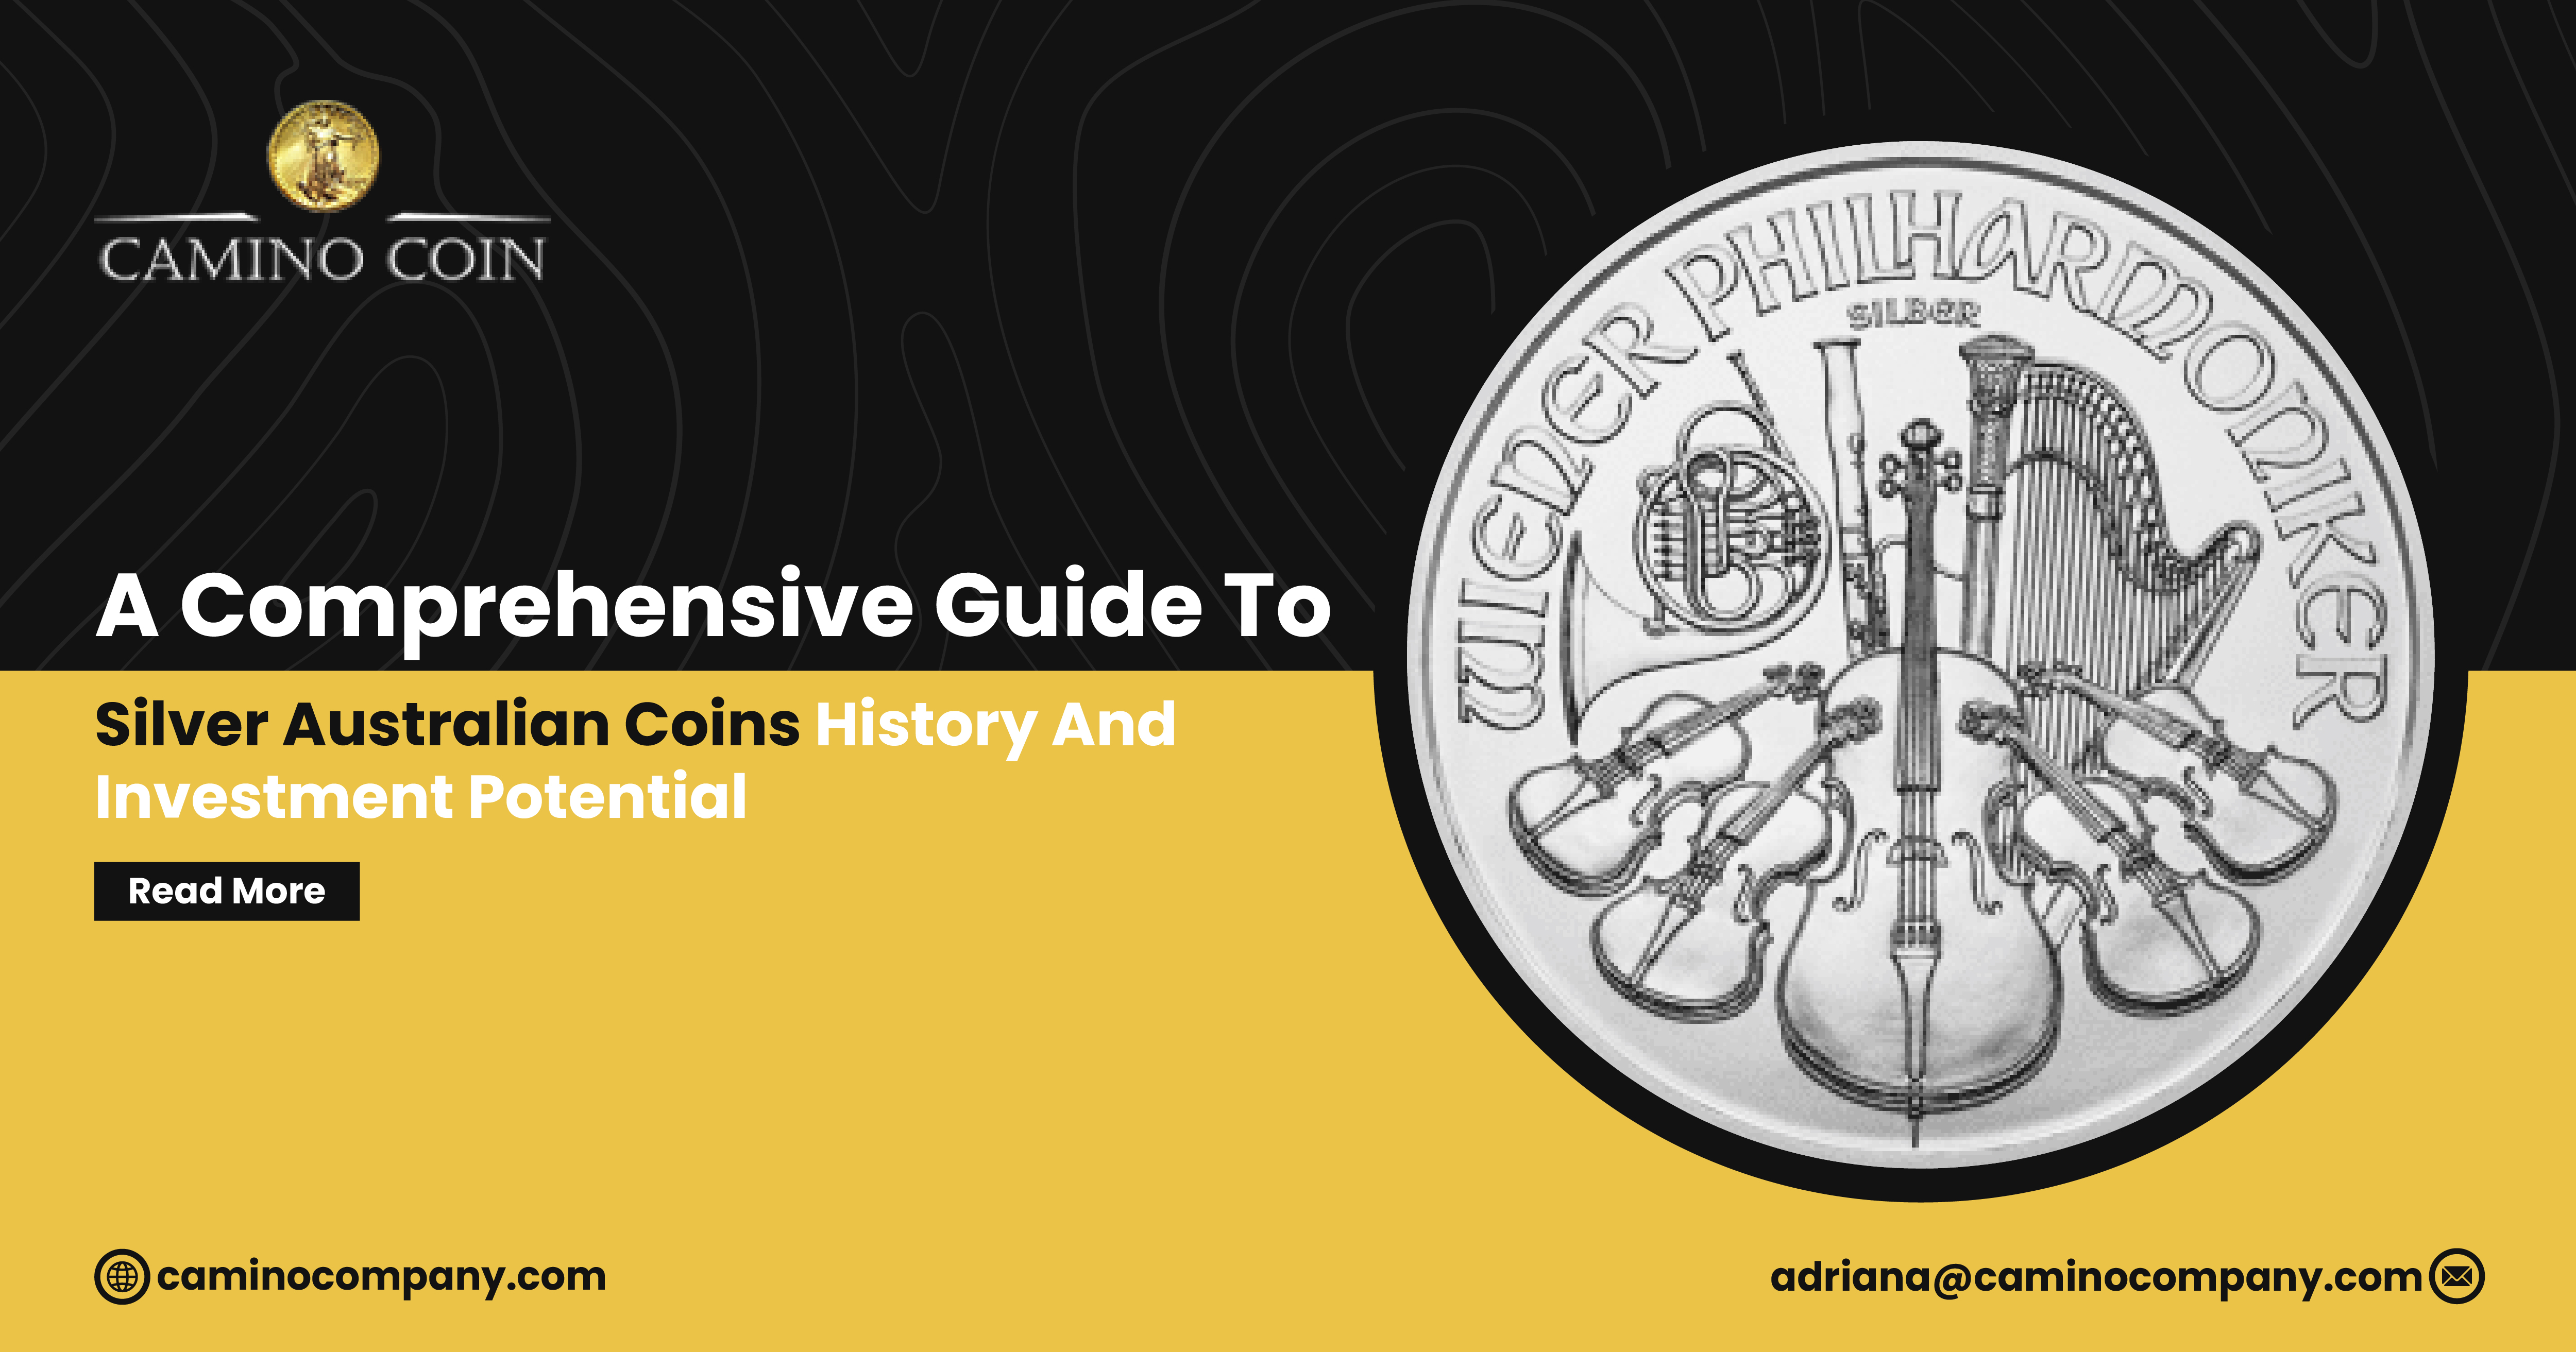 A Comprehensive Guide to Silver Australian Coins History and Investment Potential